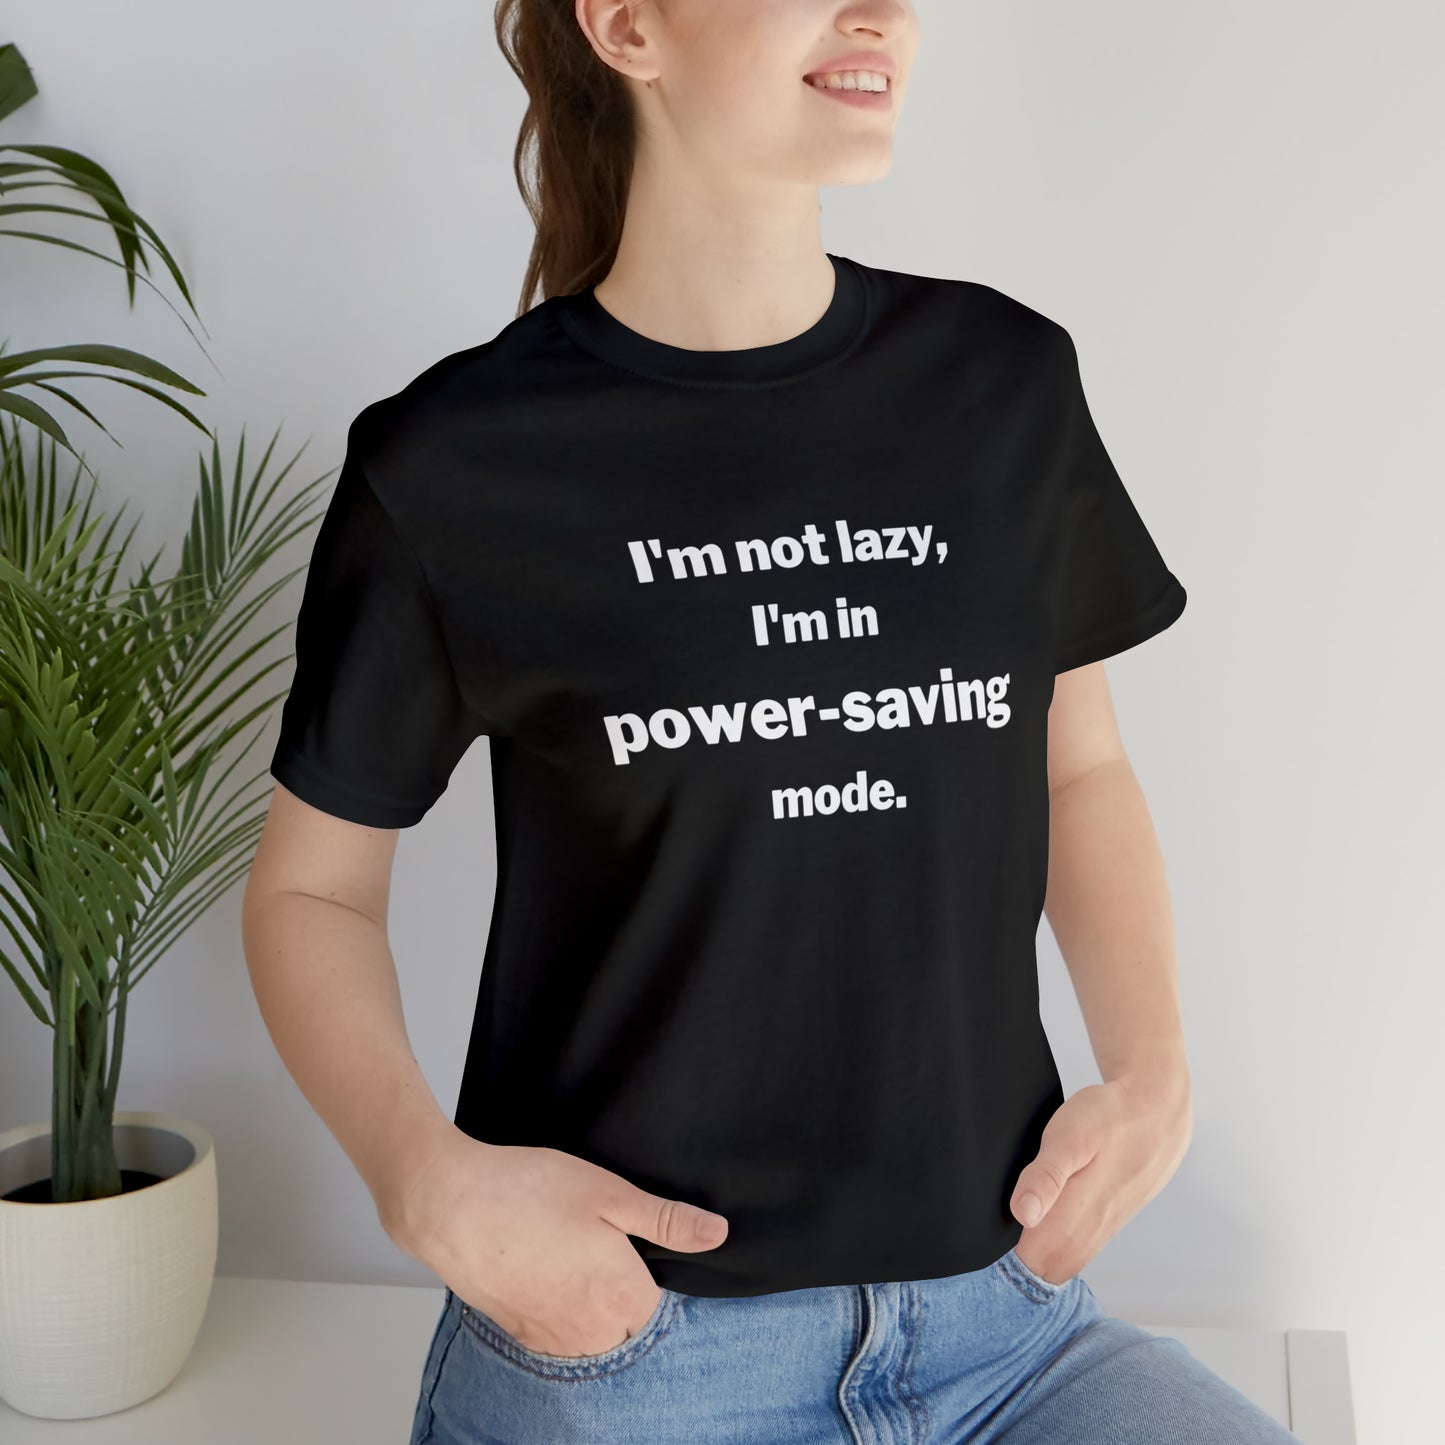 I'm Not Lazy - I'm In Power Saving Mode - T-Shirt